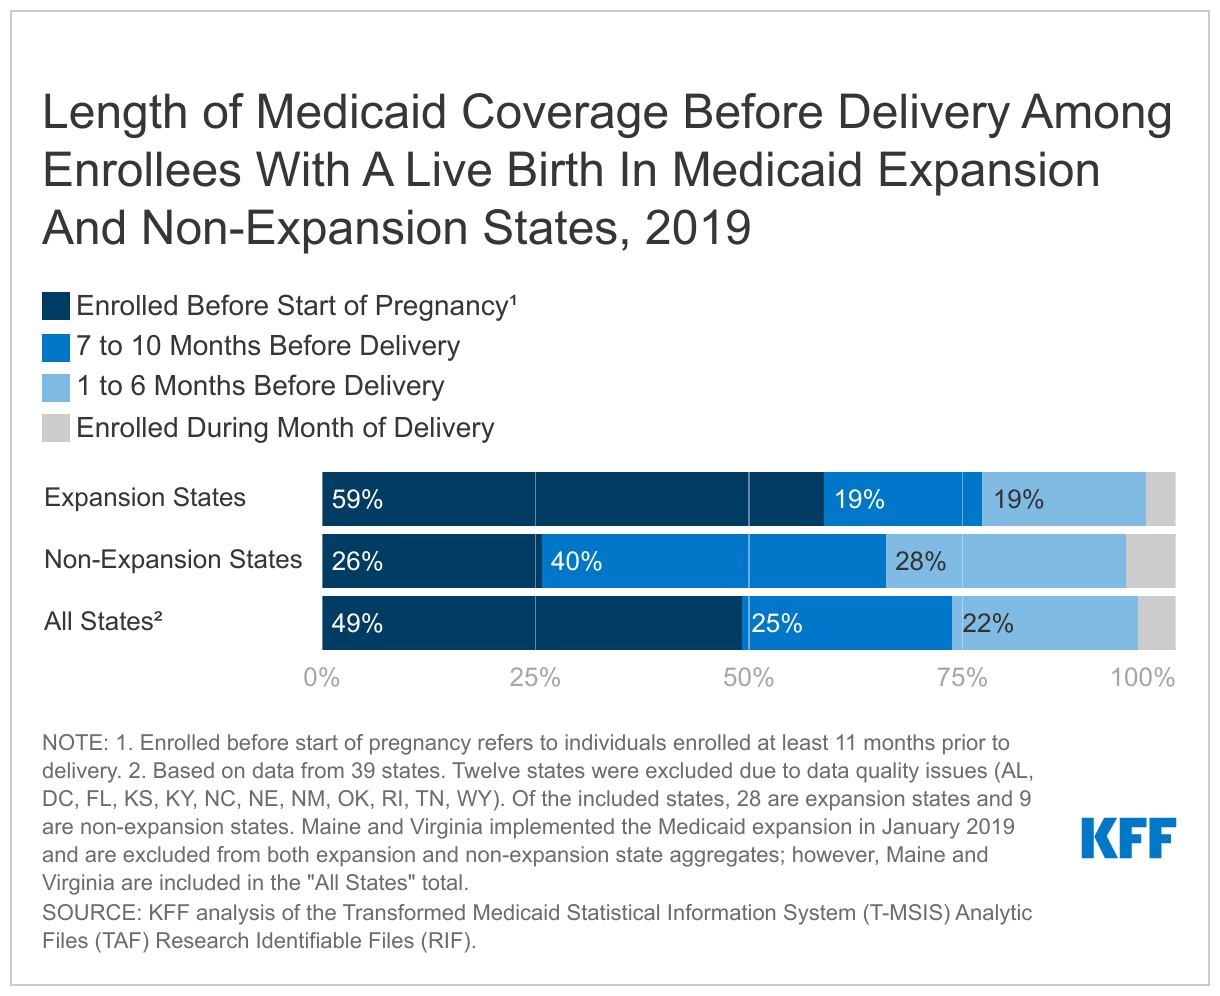 https://www.kff.org/wp-content/uploads/2022/10/length-of-medicaid-coverage-before-delivery-among-enrollees-with-a-live-birth-in-medicaid-expansion-and-non-expansion-states-2019.jpg